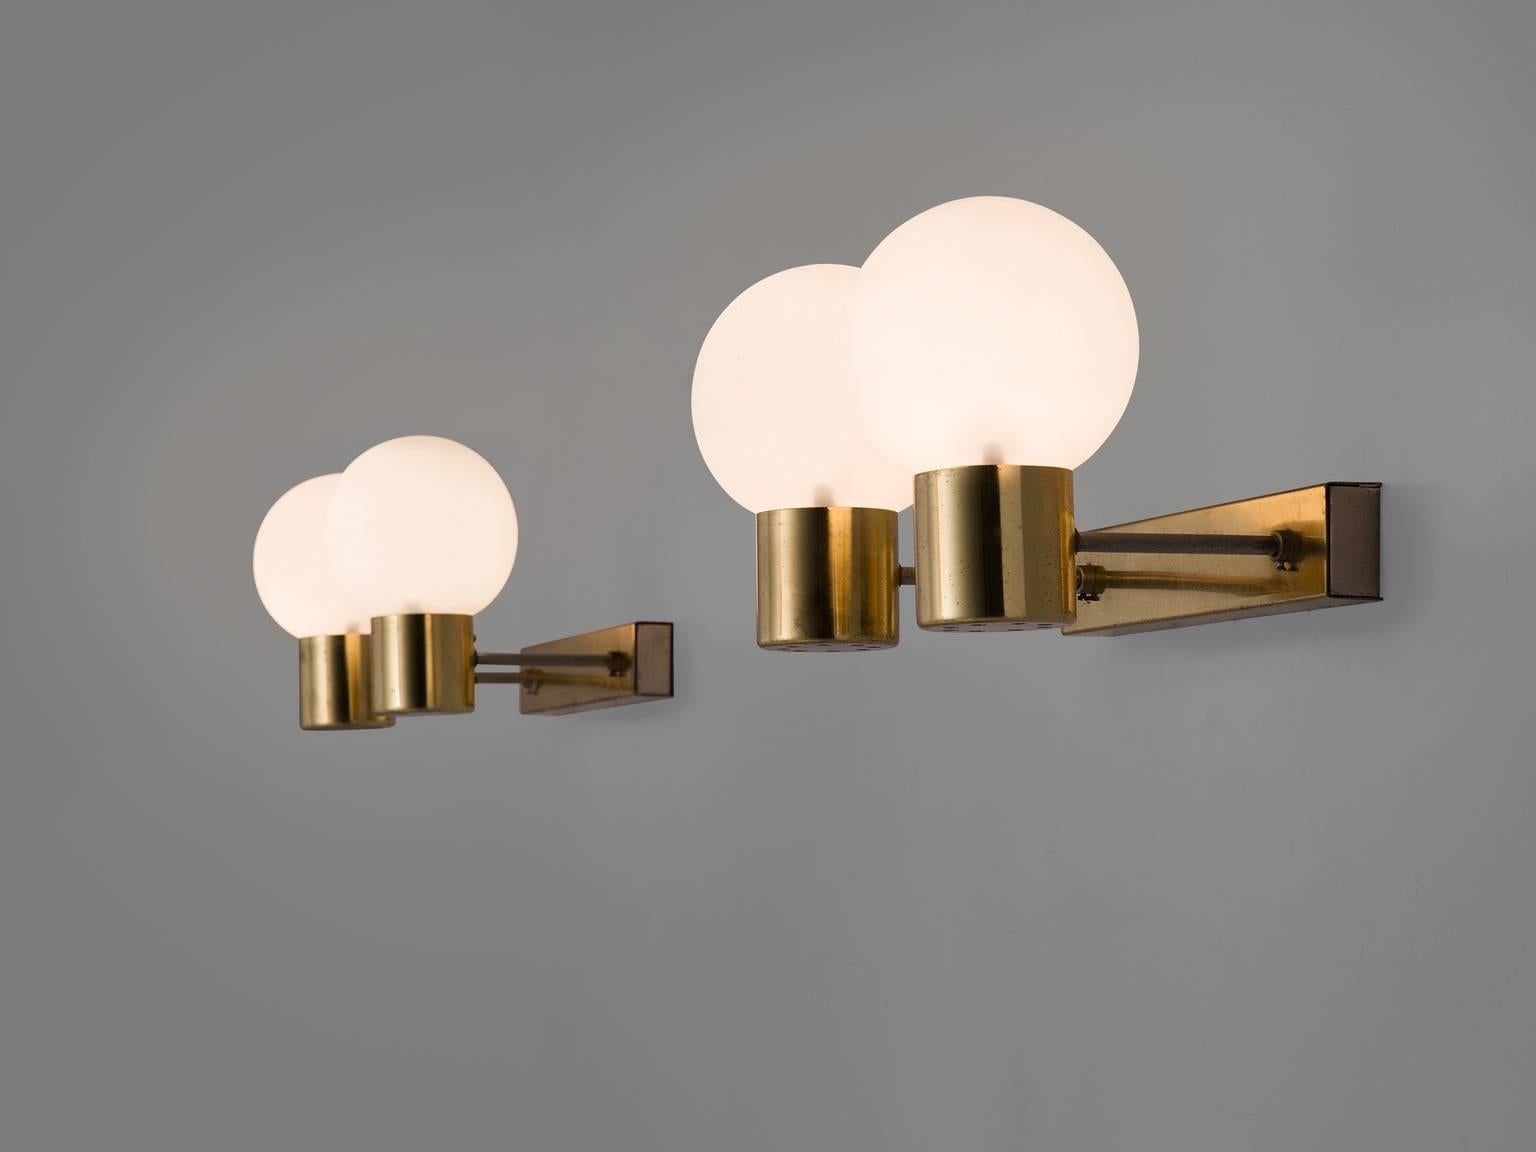 Wall lights in brass and opaline glass, Europe, 1960s. 

Set of eight solid brass sconces with glass shades with a warm opaline white shade. The lights each have relatively long arms ending in an opaline light bulb. These wall scones have a very